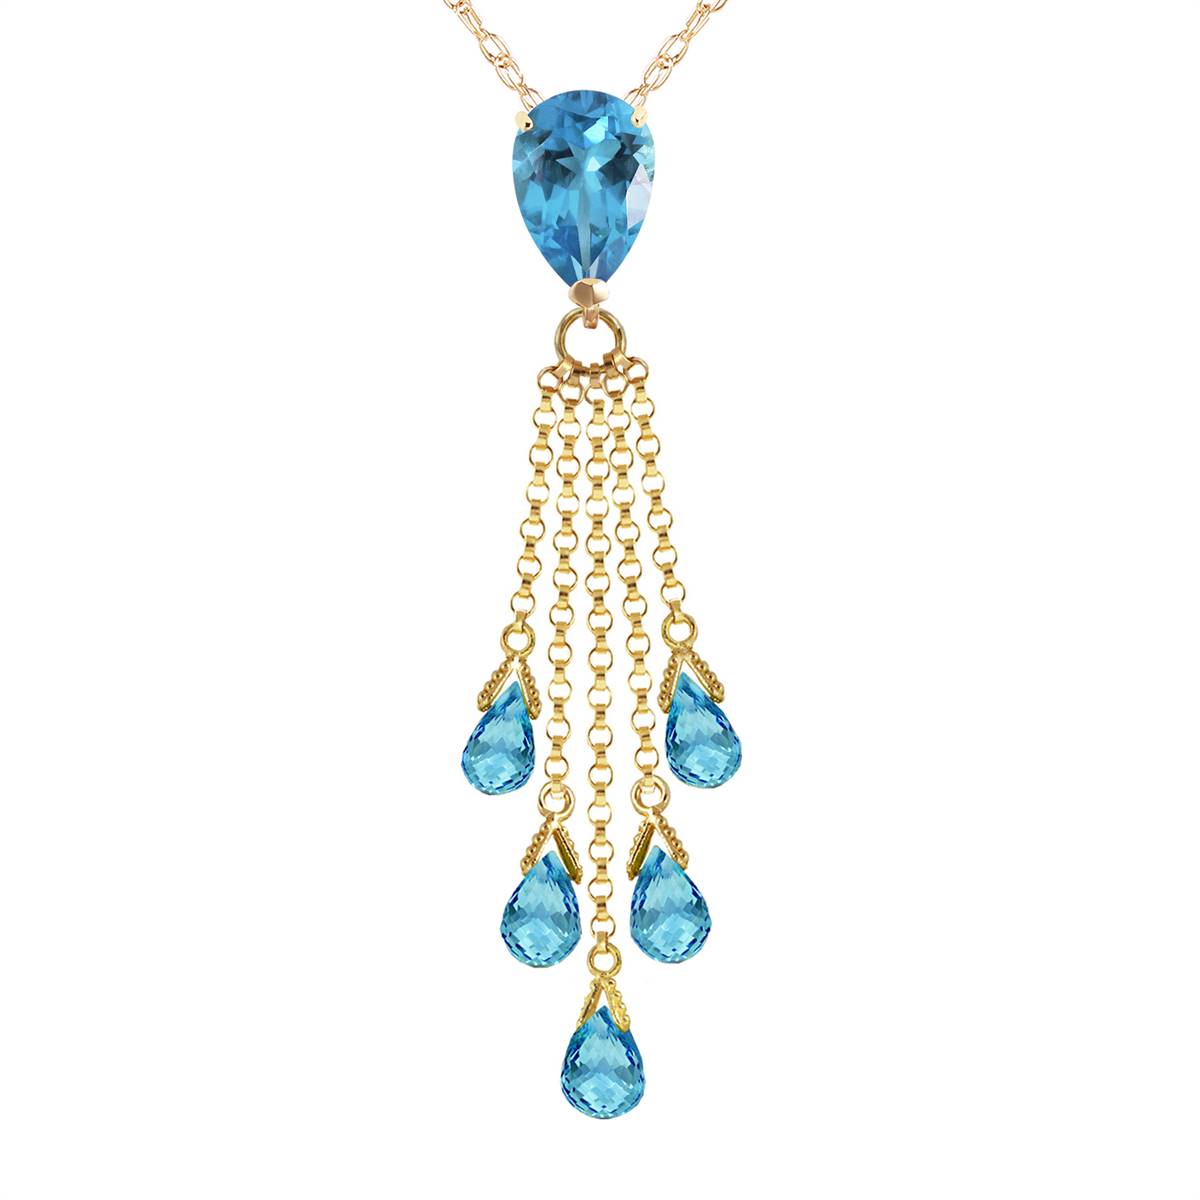 7.5 Carat 14K Solid Yellow Gold Stand Tall Blue Topaz Necklace